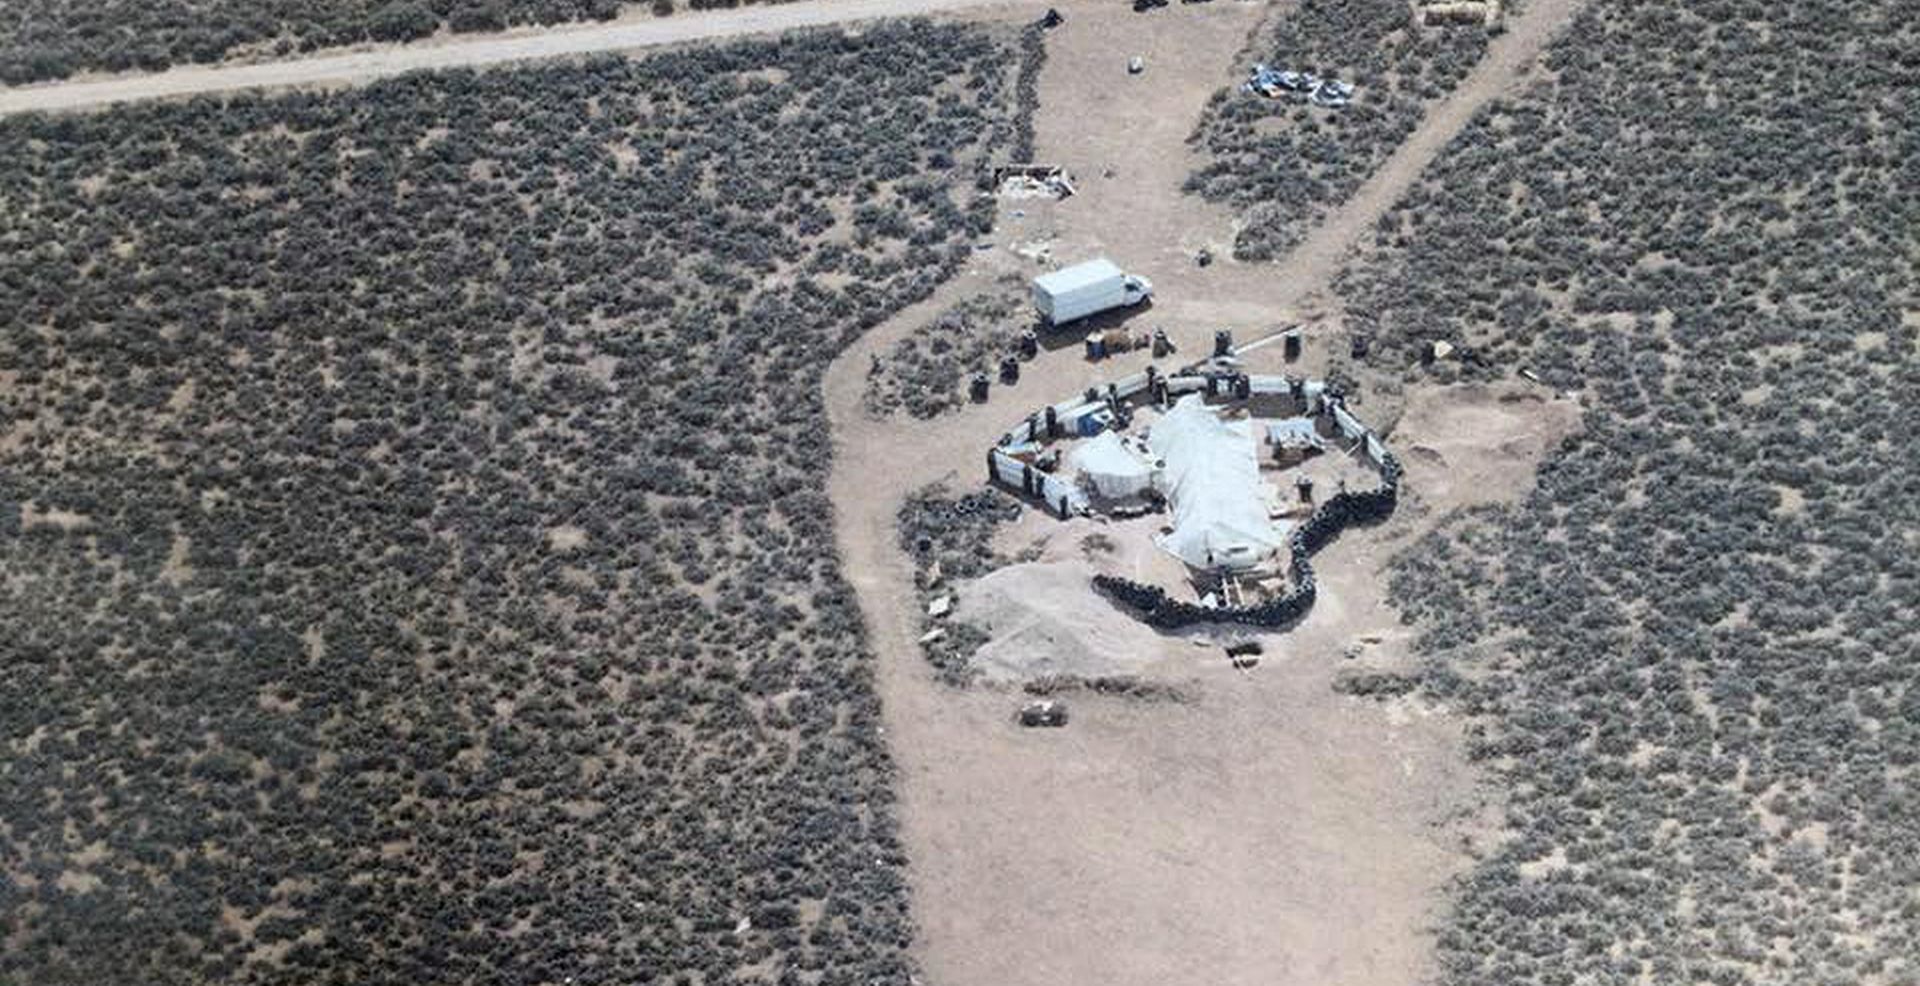 epa06929785 A handout photo made available by Taos County Sheriff’s Office shows an aerial photo of compound in rural Amalia, New Mexico, USA  (issued 05 August 2018). Law enforcement officers found 11 children, aged 1 to 15 living in squalid conditions and with little food at a compound in the rural community of Amalia, New Mexico, USA. Two men, Siraj Wahhaj and Lucas Morten were taken into custody.  EPA/TAOS COUNTY SHERIFF'S OFFICE  HANDOUT BEST QUALITY AVAILABLE HANDOUT EDITORIAL USE ONLY/NO SALES